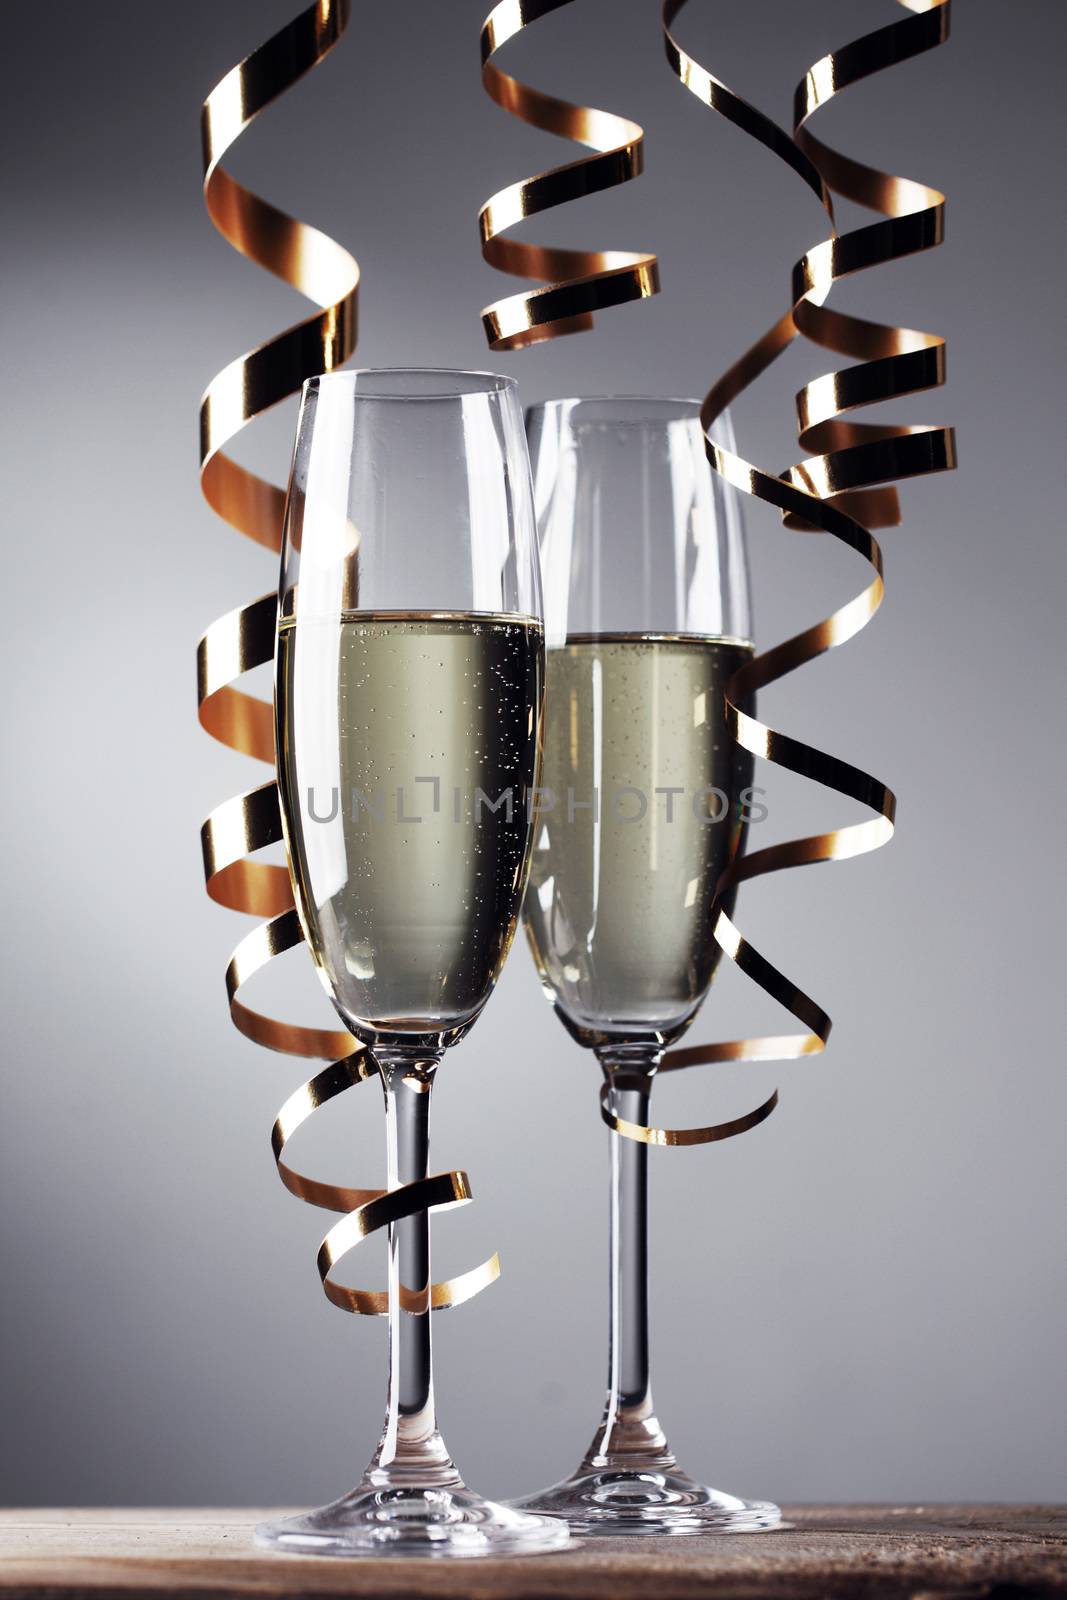 Two glasses of champagne and ribbons on light bokeh background